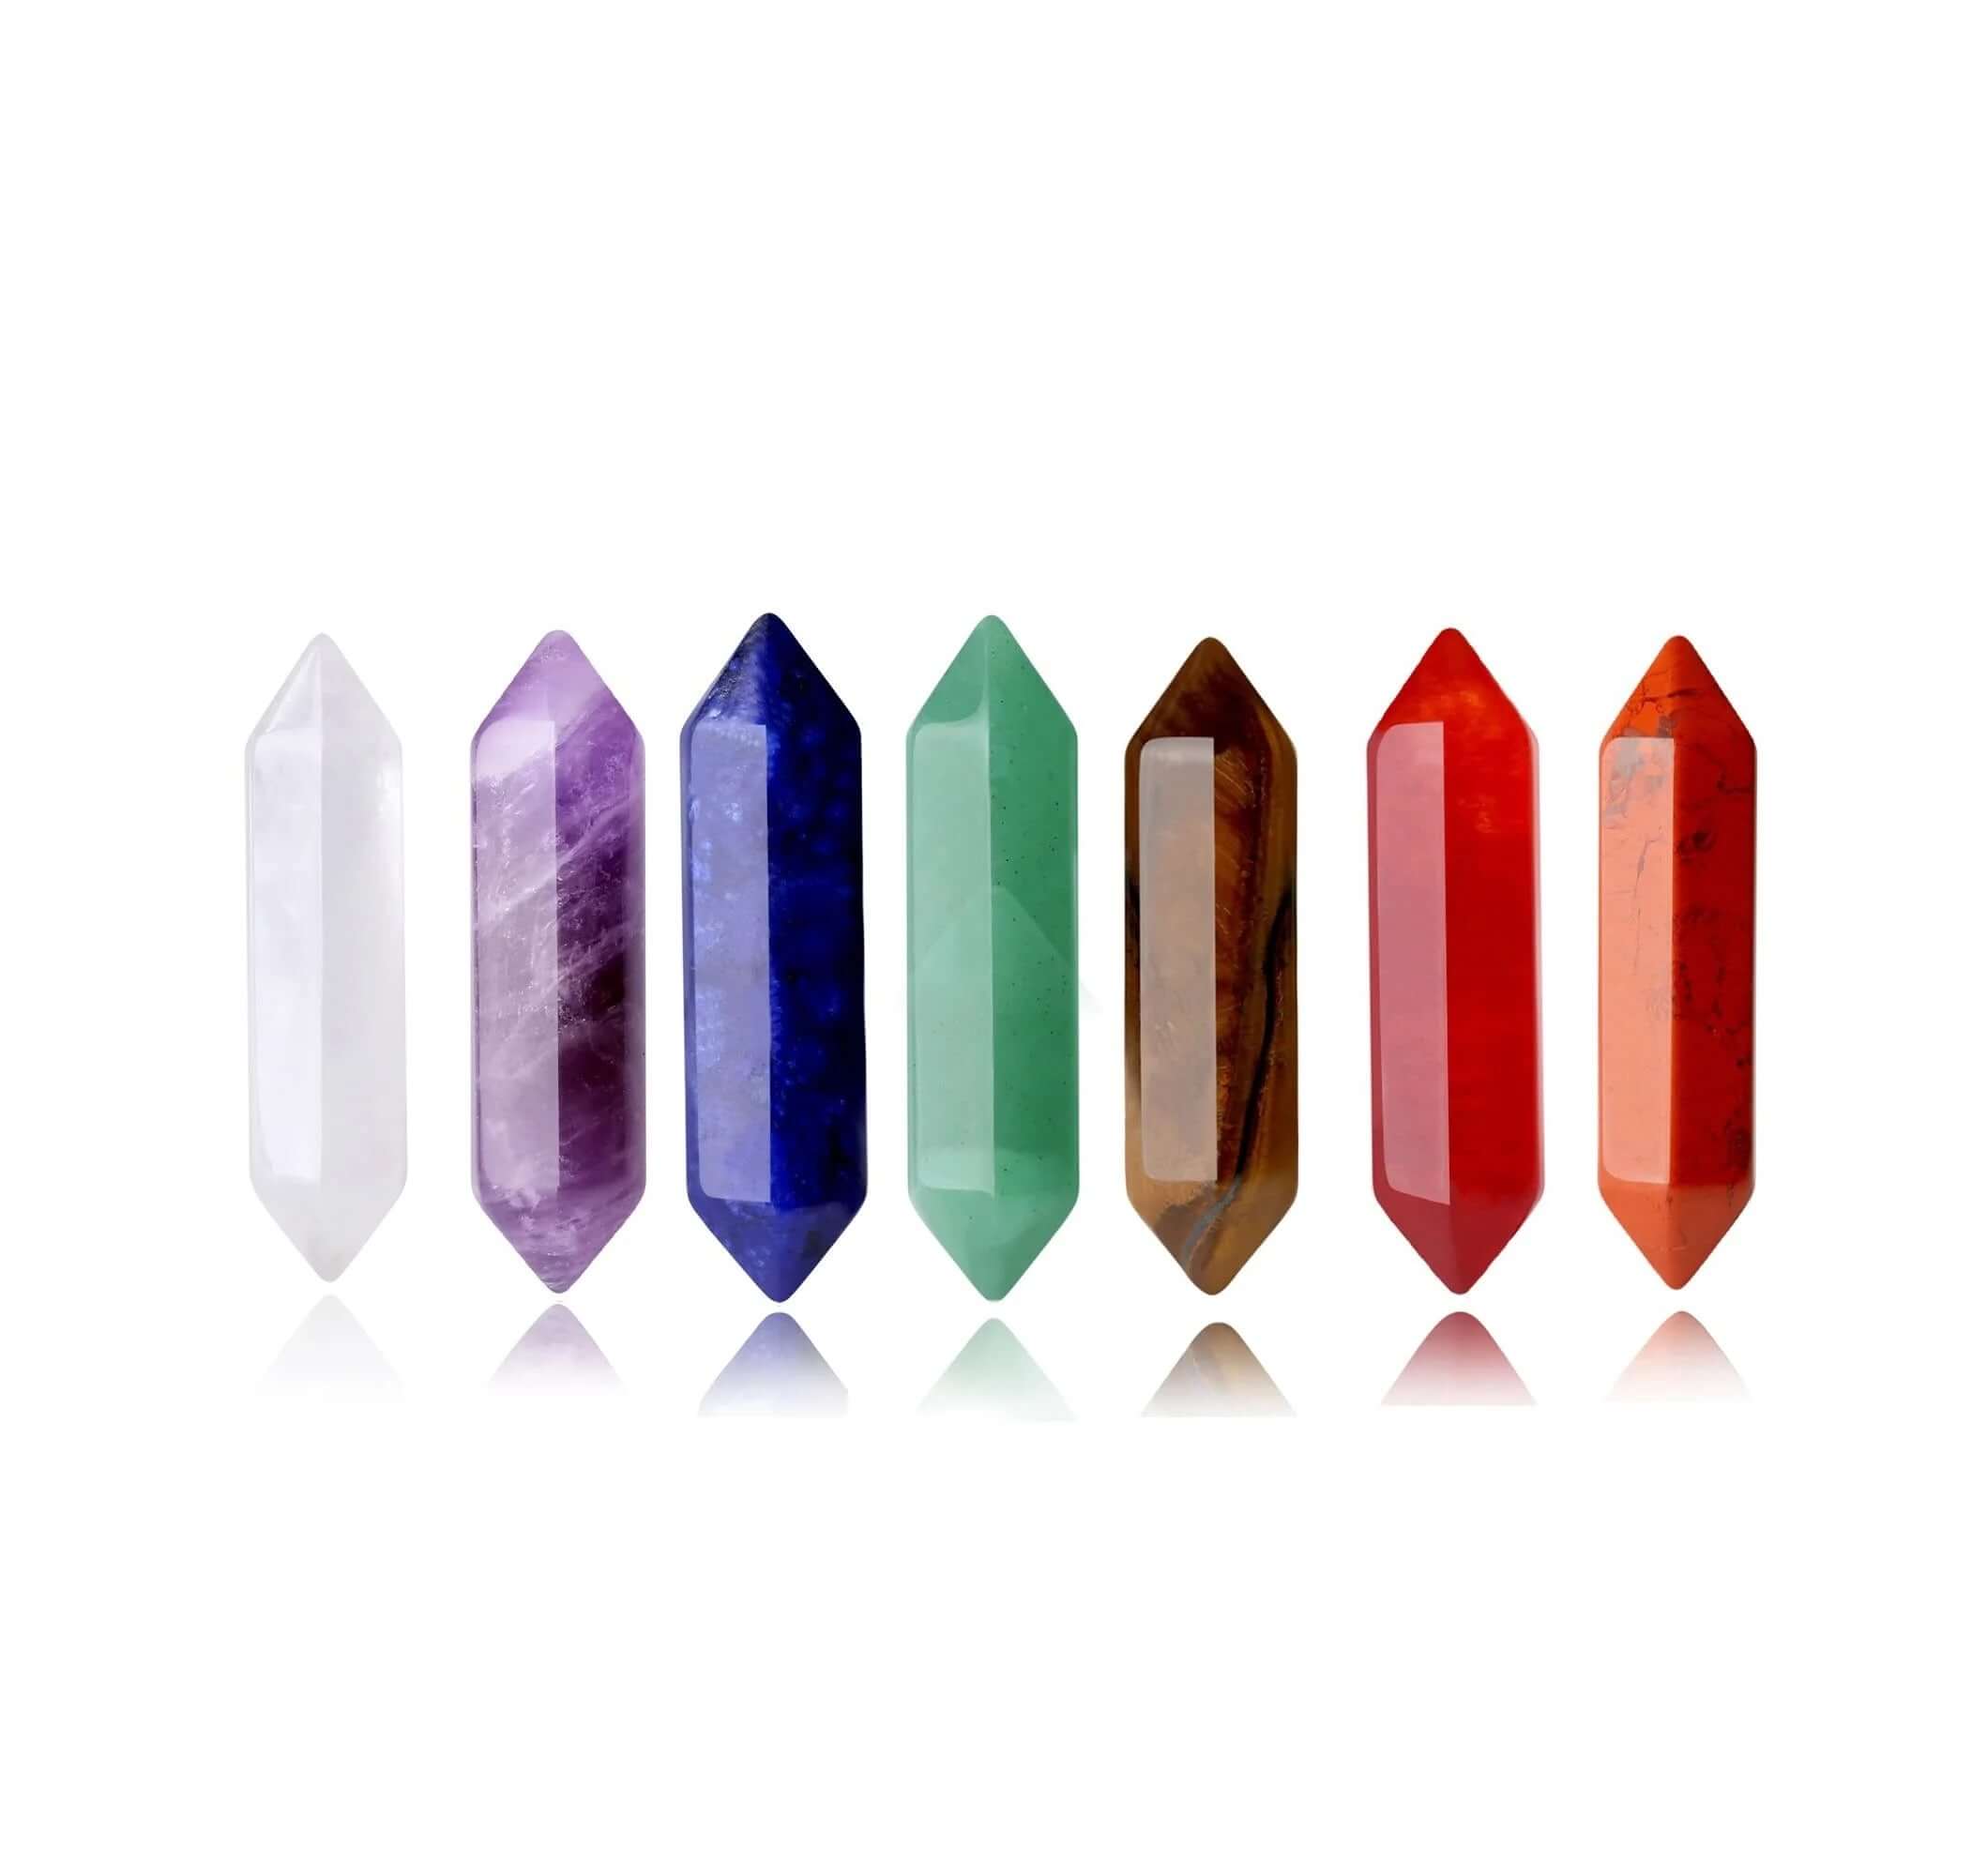 Image of 7 Chakra Double Points for balancing and aligning energy.